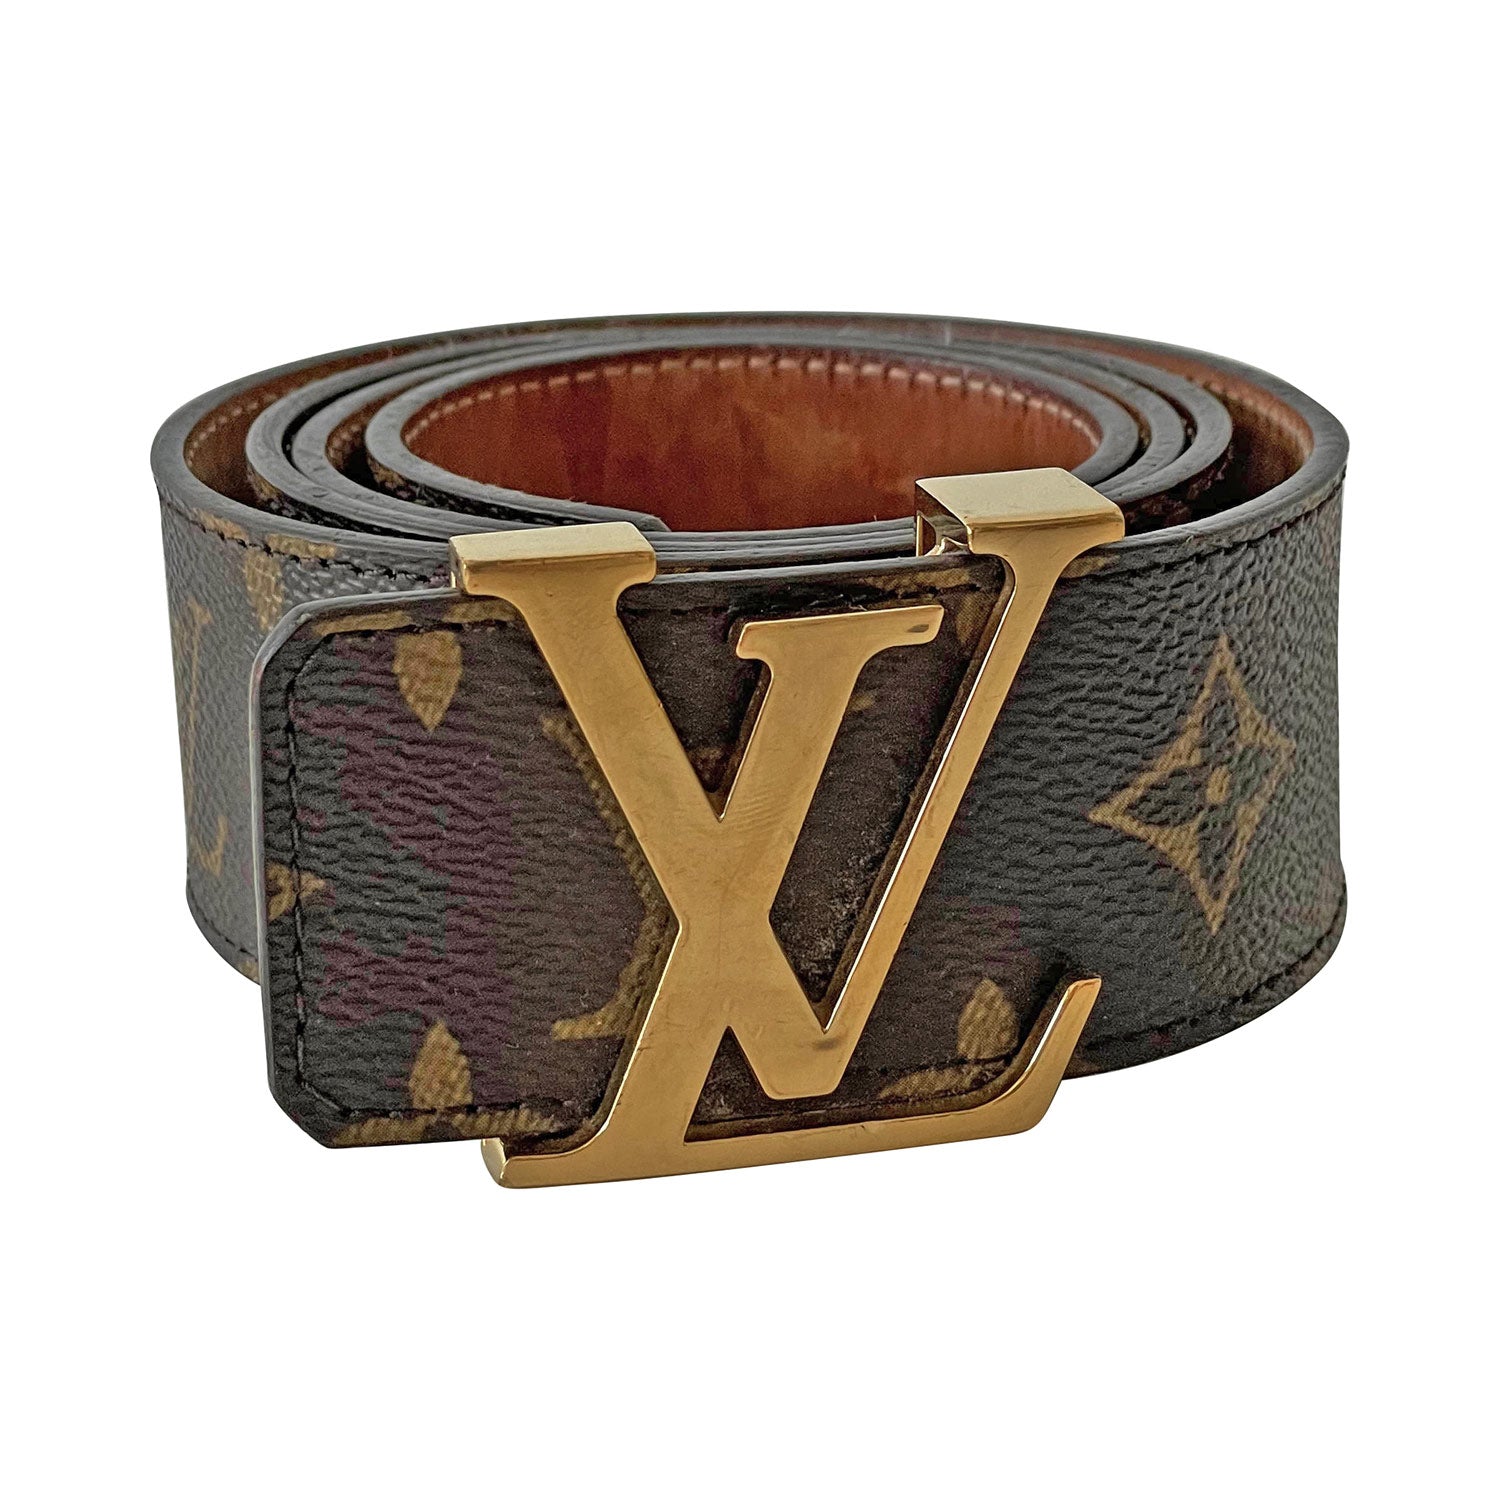 Only 138.00 usd for Louis Vuitton Graphite Neogram Belt 34 Online at the  Shop